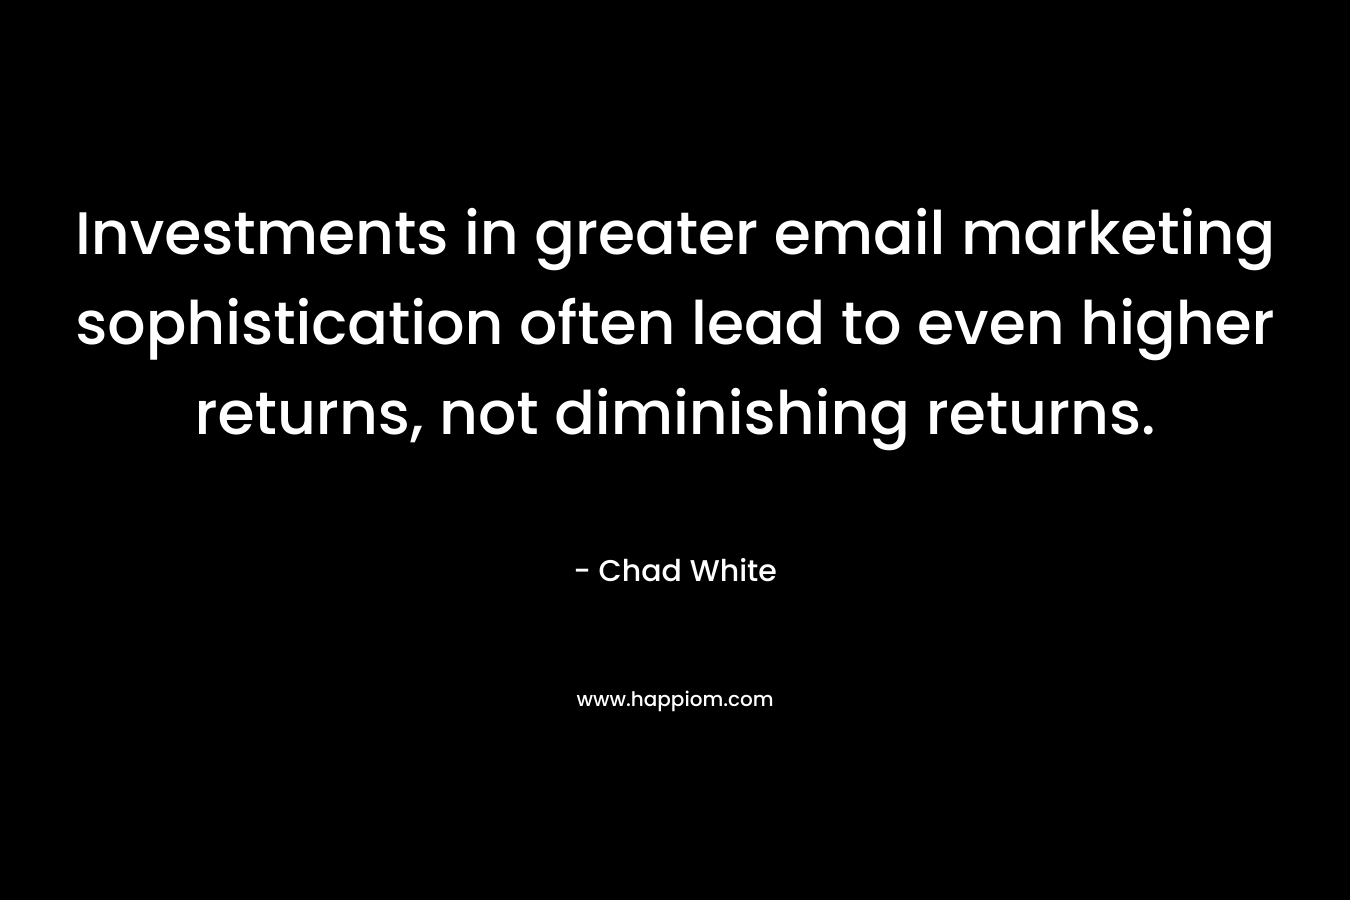 Investments in greater email marketing sophistication often lead to even higher returns, not diminishing returns. – Chad White